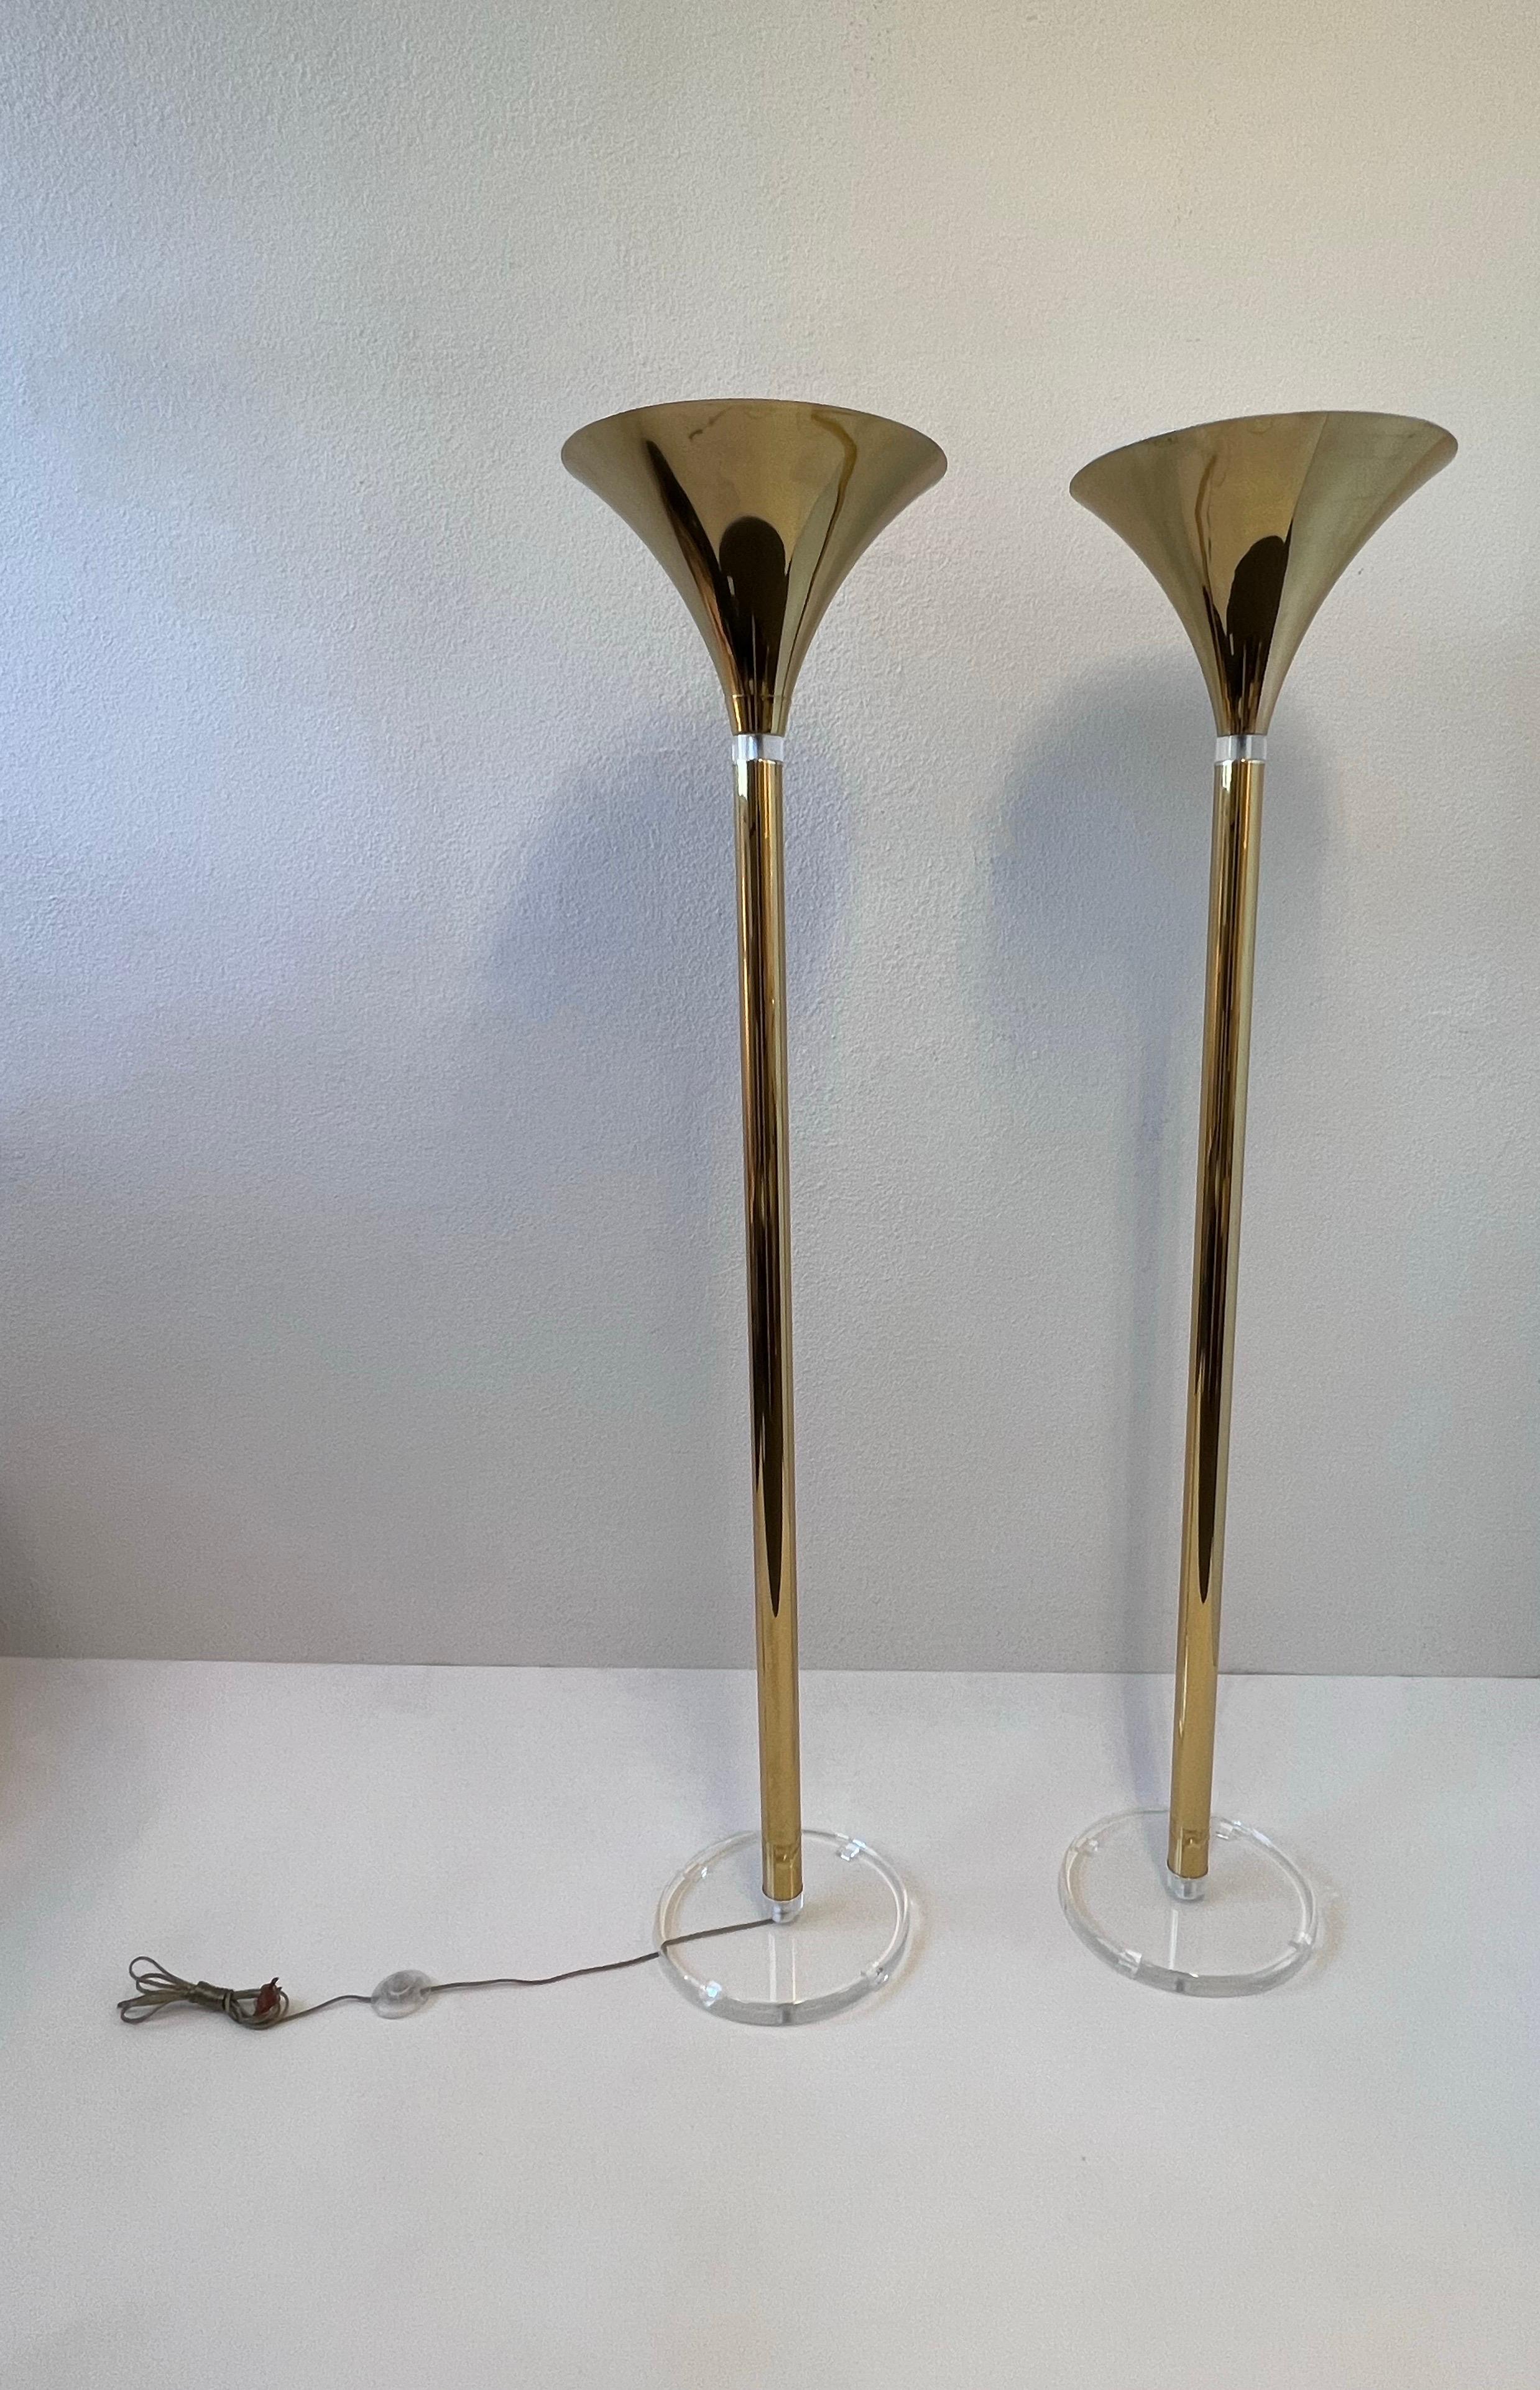 1980’s Glamorous pair of polish brass and clear acrylic floor lamps. 
In original vintage condition, Brass shows some age spots (see detail photos).
They take one 100w max Edison light bulb. 
